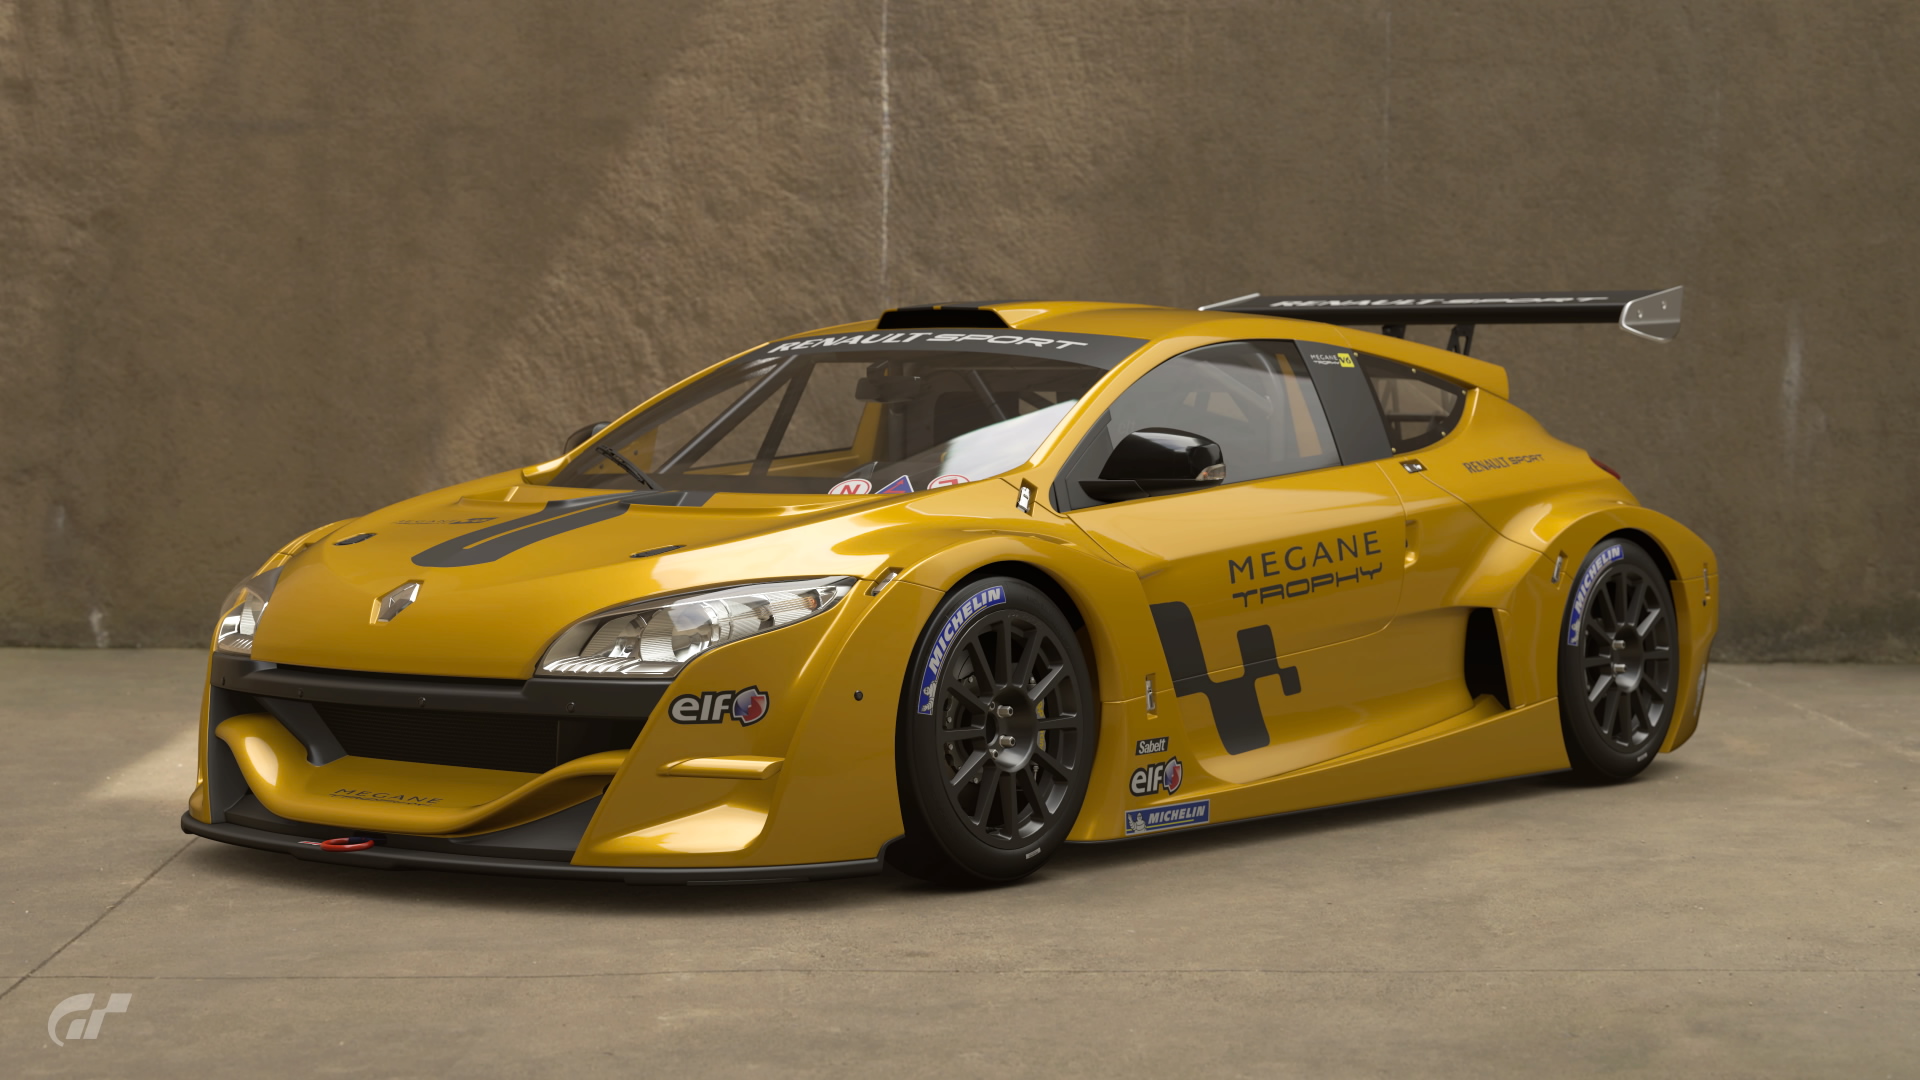 https://static.wikia.nocookie.net/gran-turismo/images/0/0b/Renault_Sport_M%C3%A9gane_Trophy_%2711.jpg/revision/latest?cb=20220906000236